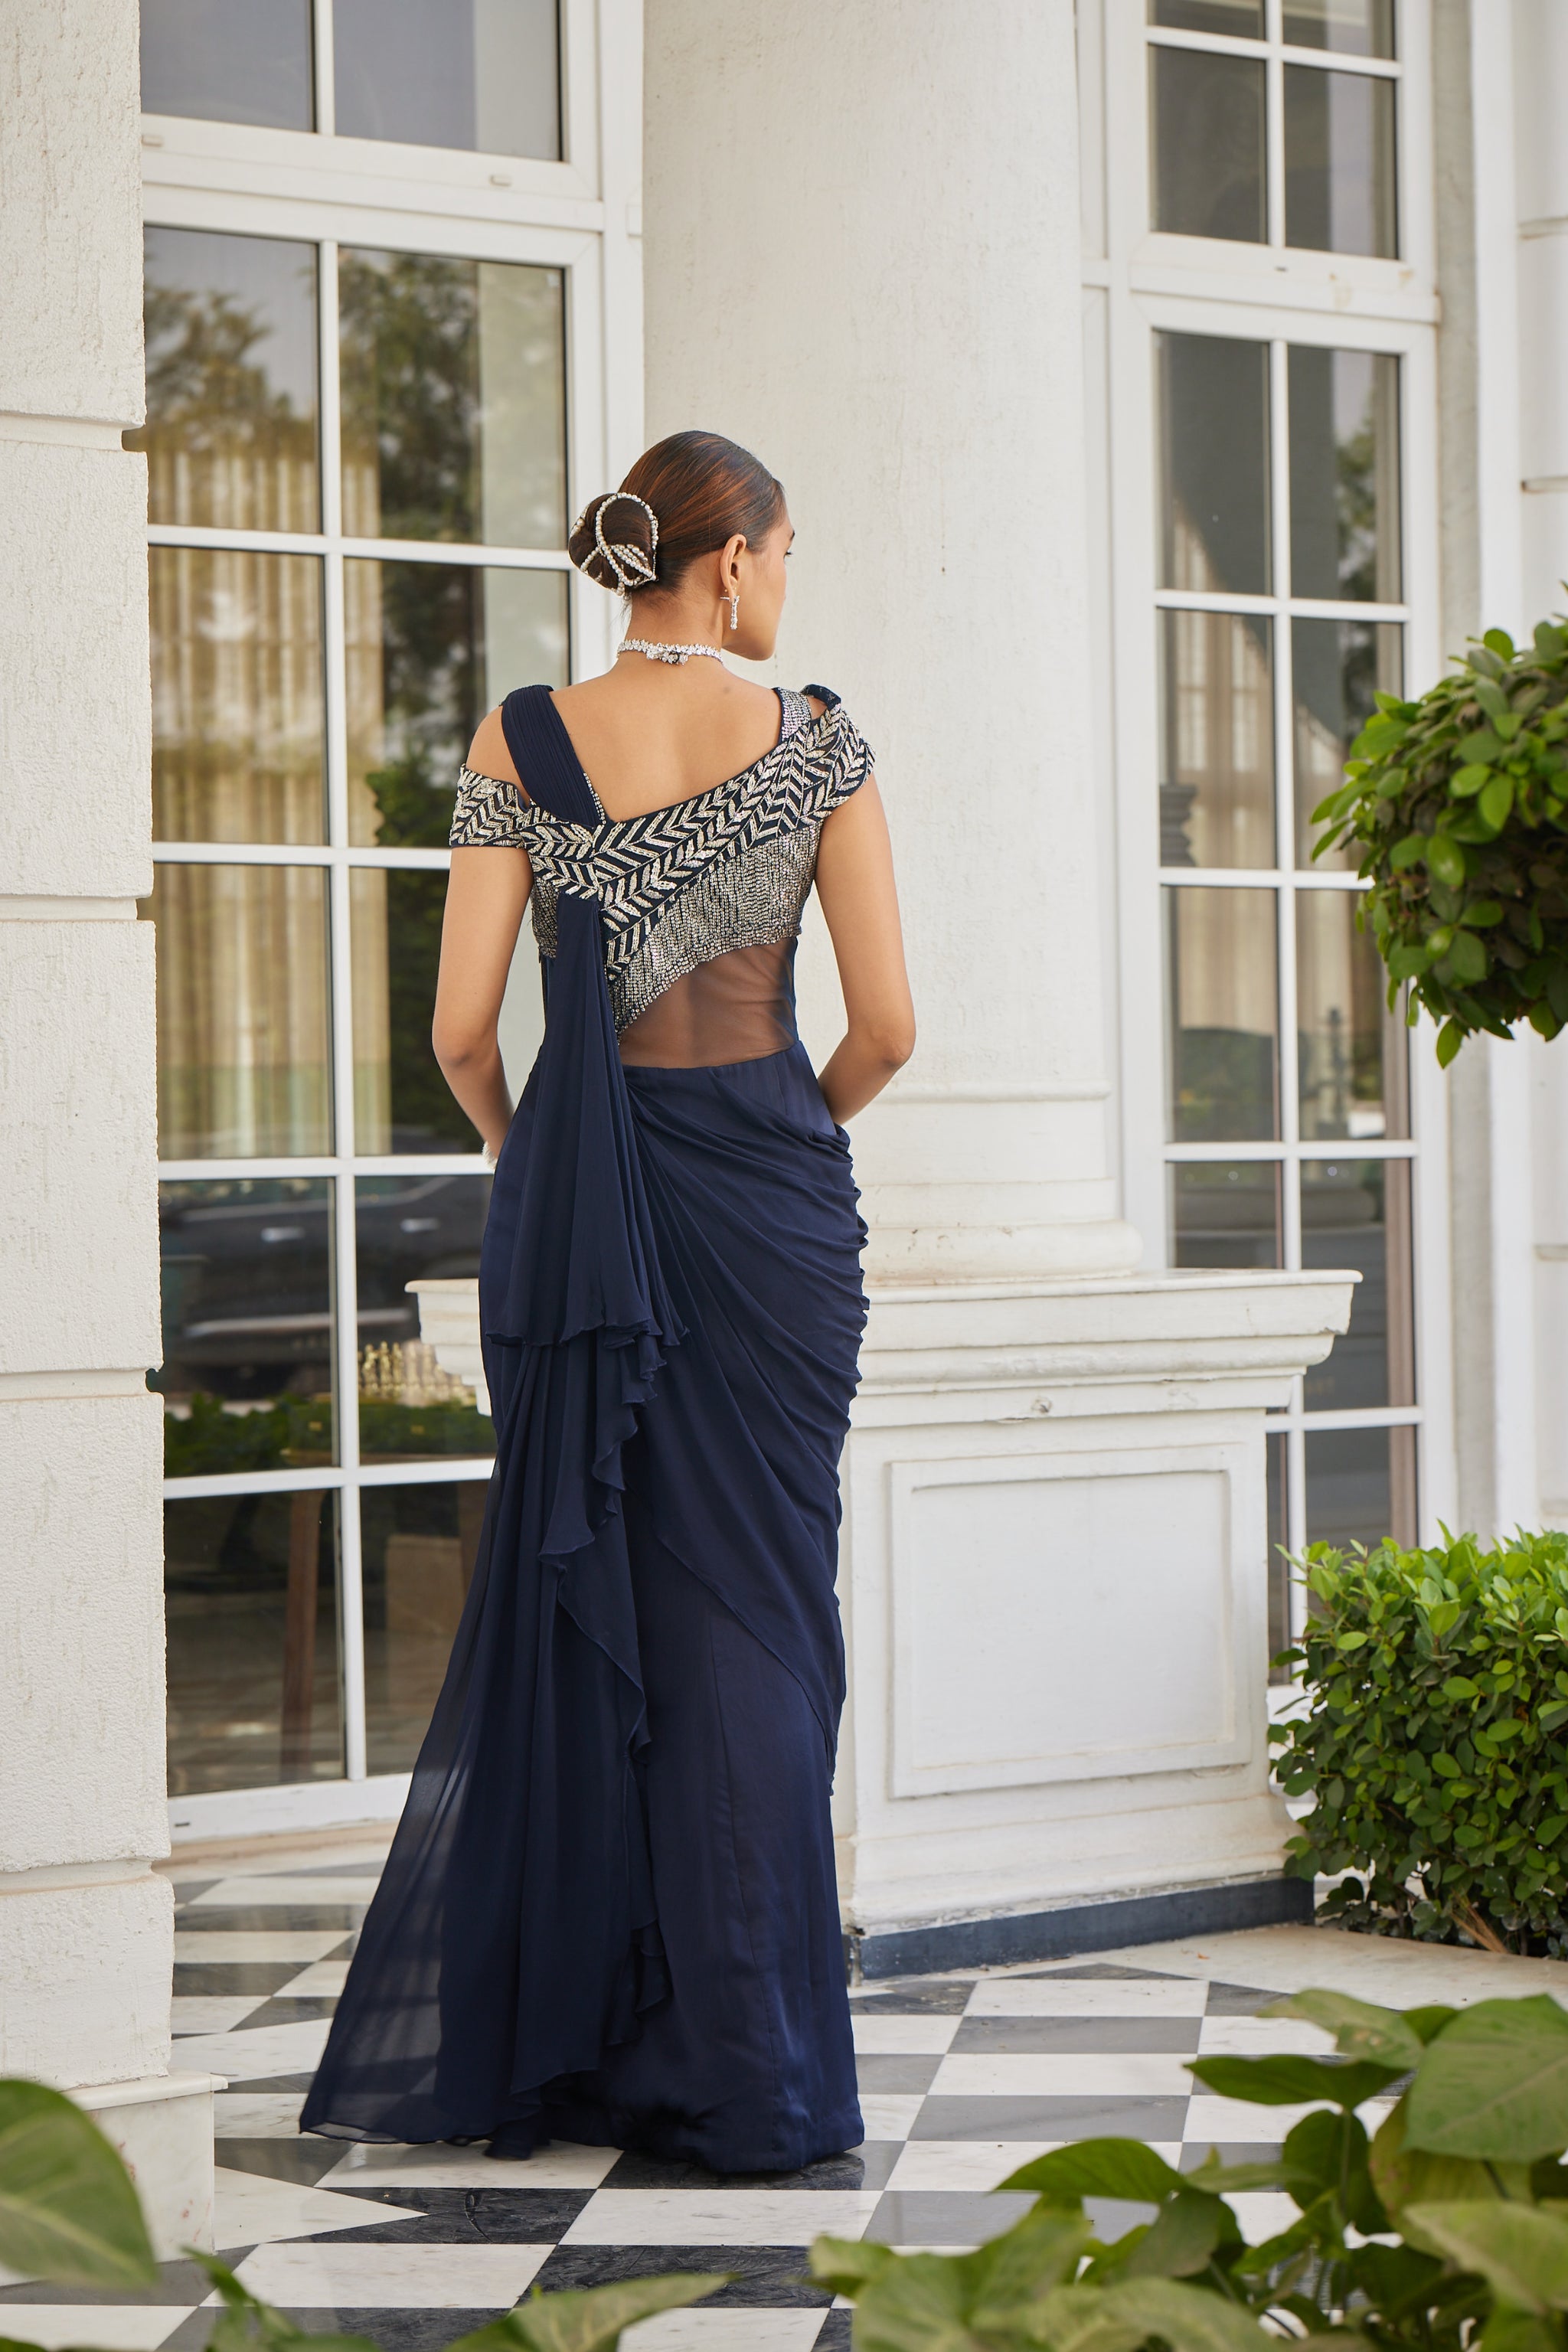 Shop Draped Saree Gown for Women Online from India's Luxury Designers 2023